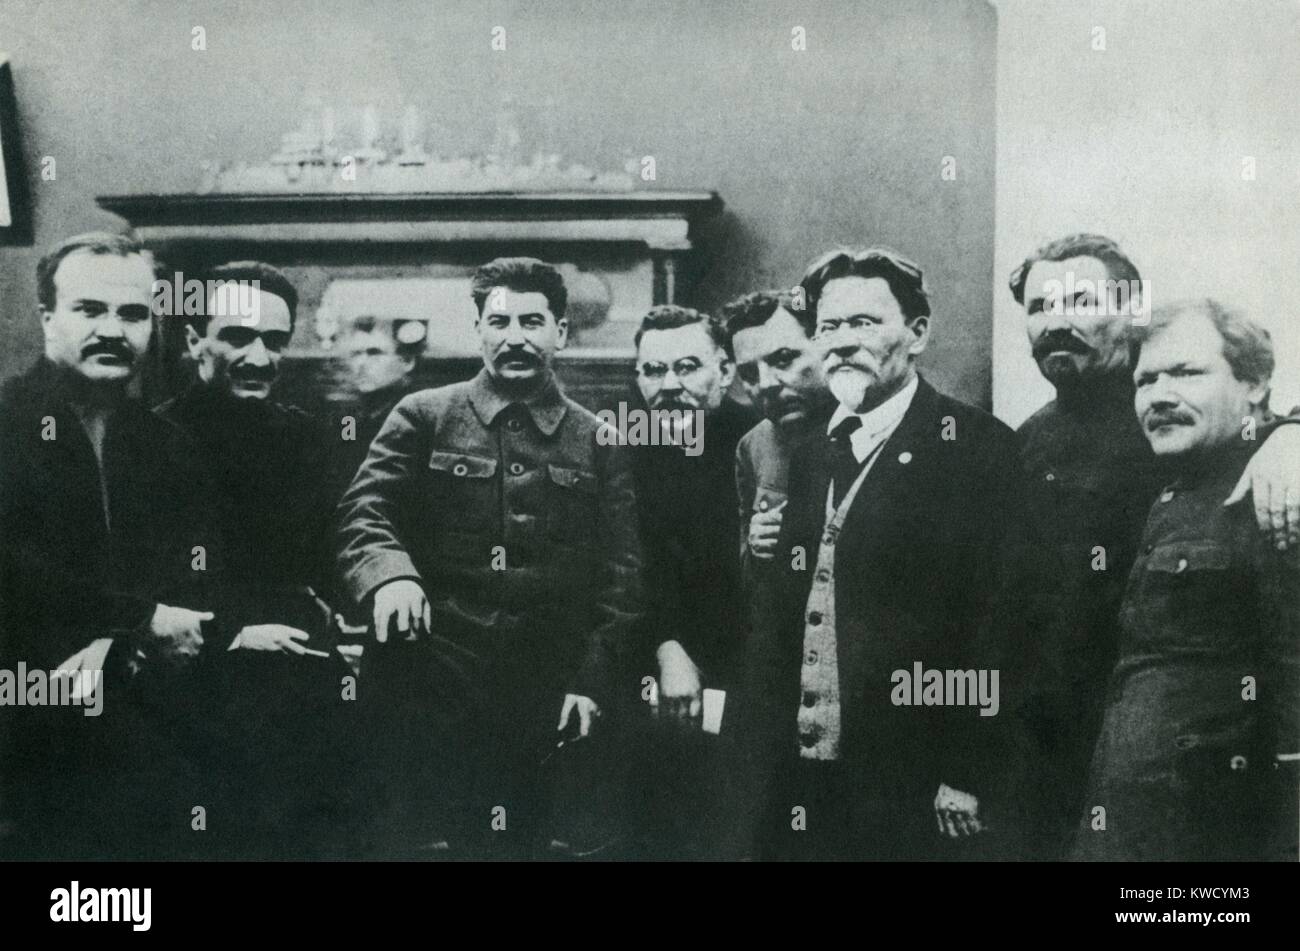 Stalin photographed with high Soviet officials, in March 1929. L-R: Vyacheslav Molotov, Anastas Mikoyan, Josef Stalin, Grigory Petrovsky, Kliment Voroshilov, Mikhail Kalinin, Alexander Smirnov, Tolokonzev. Petrovsky and Smirnov were executed during the 1930s Stalinist purges (BSLOC 2017 2 31) Stock Photo